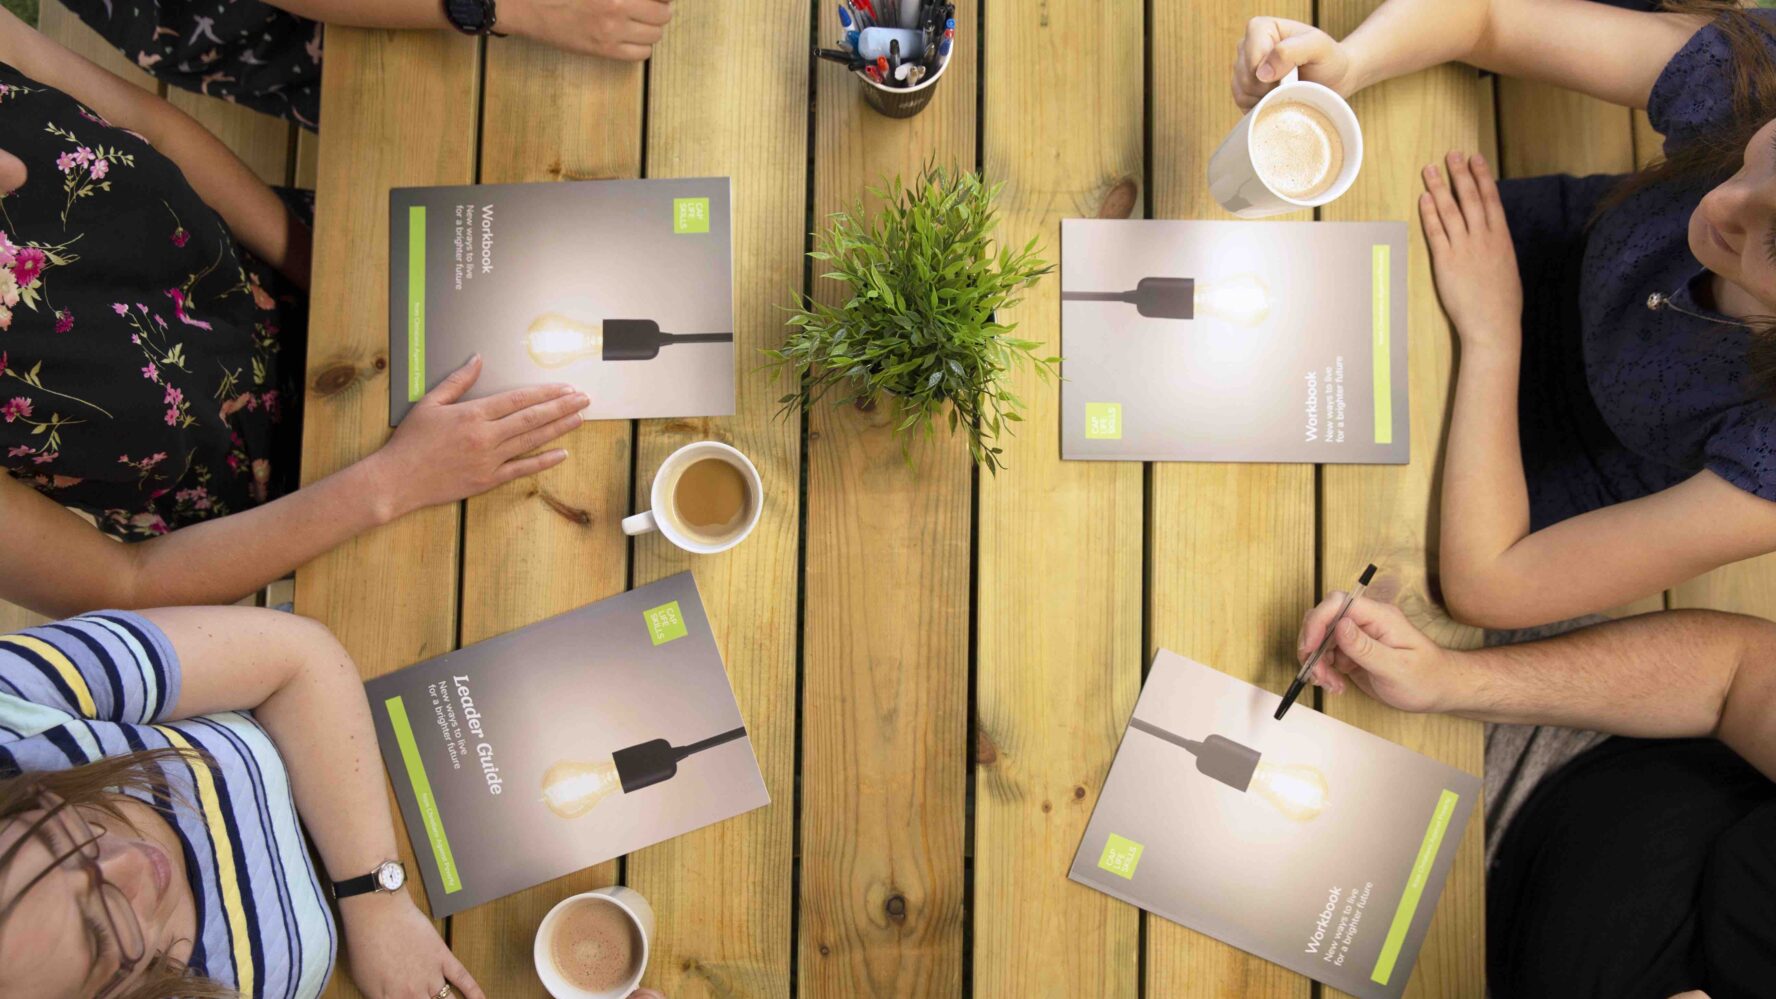 Group of men and women sat around a table holding cups of coffee and looking at workbook leaflets.